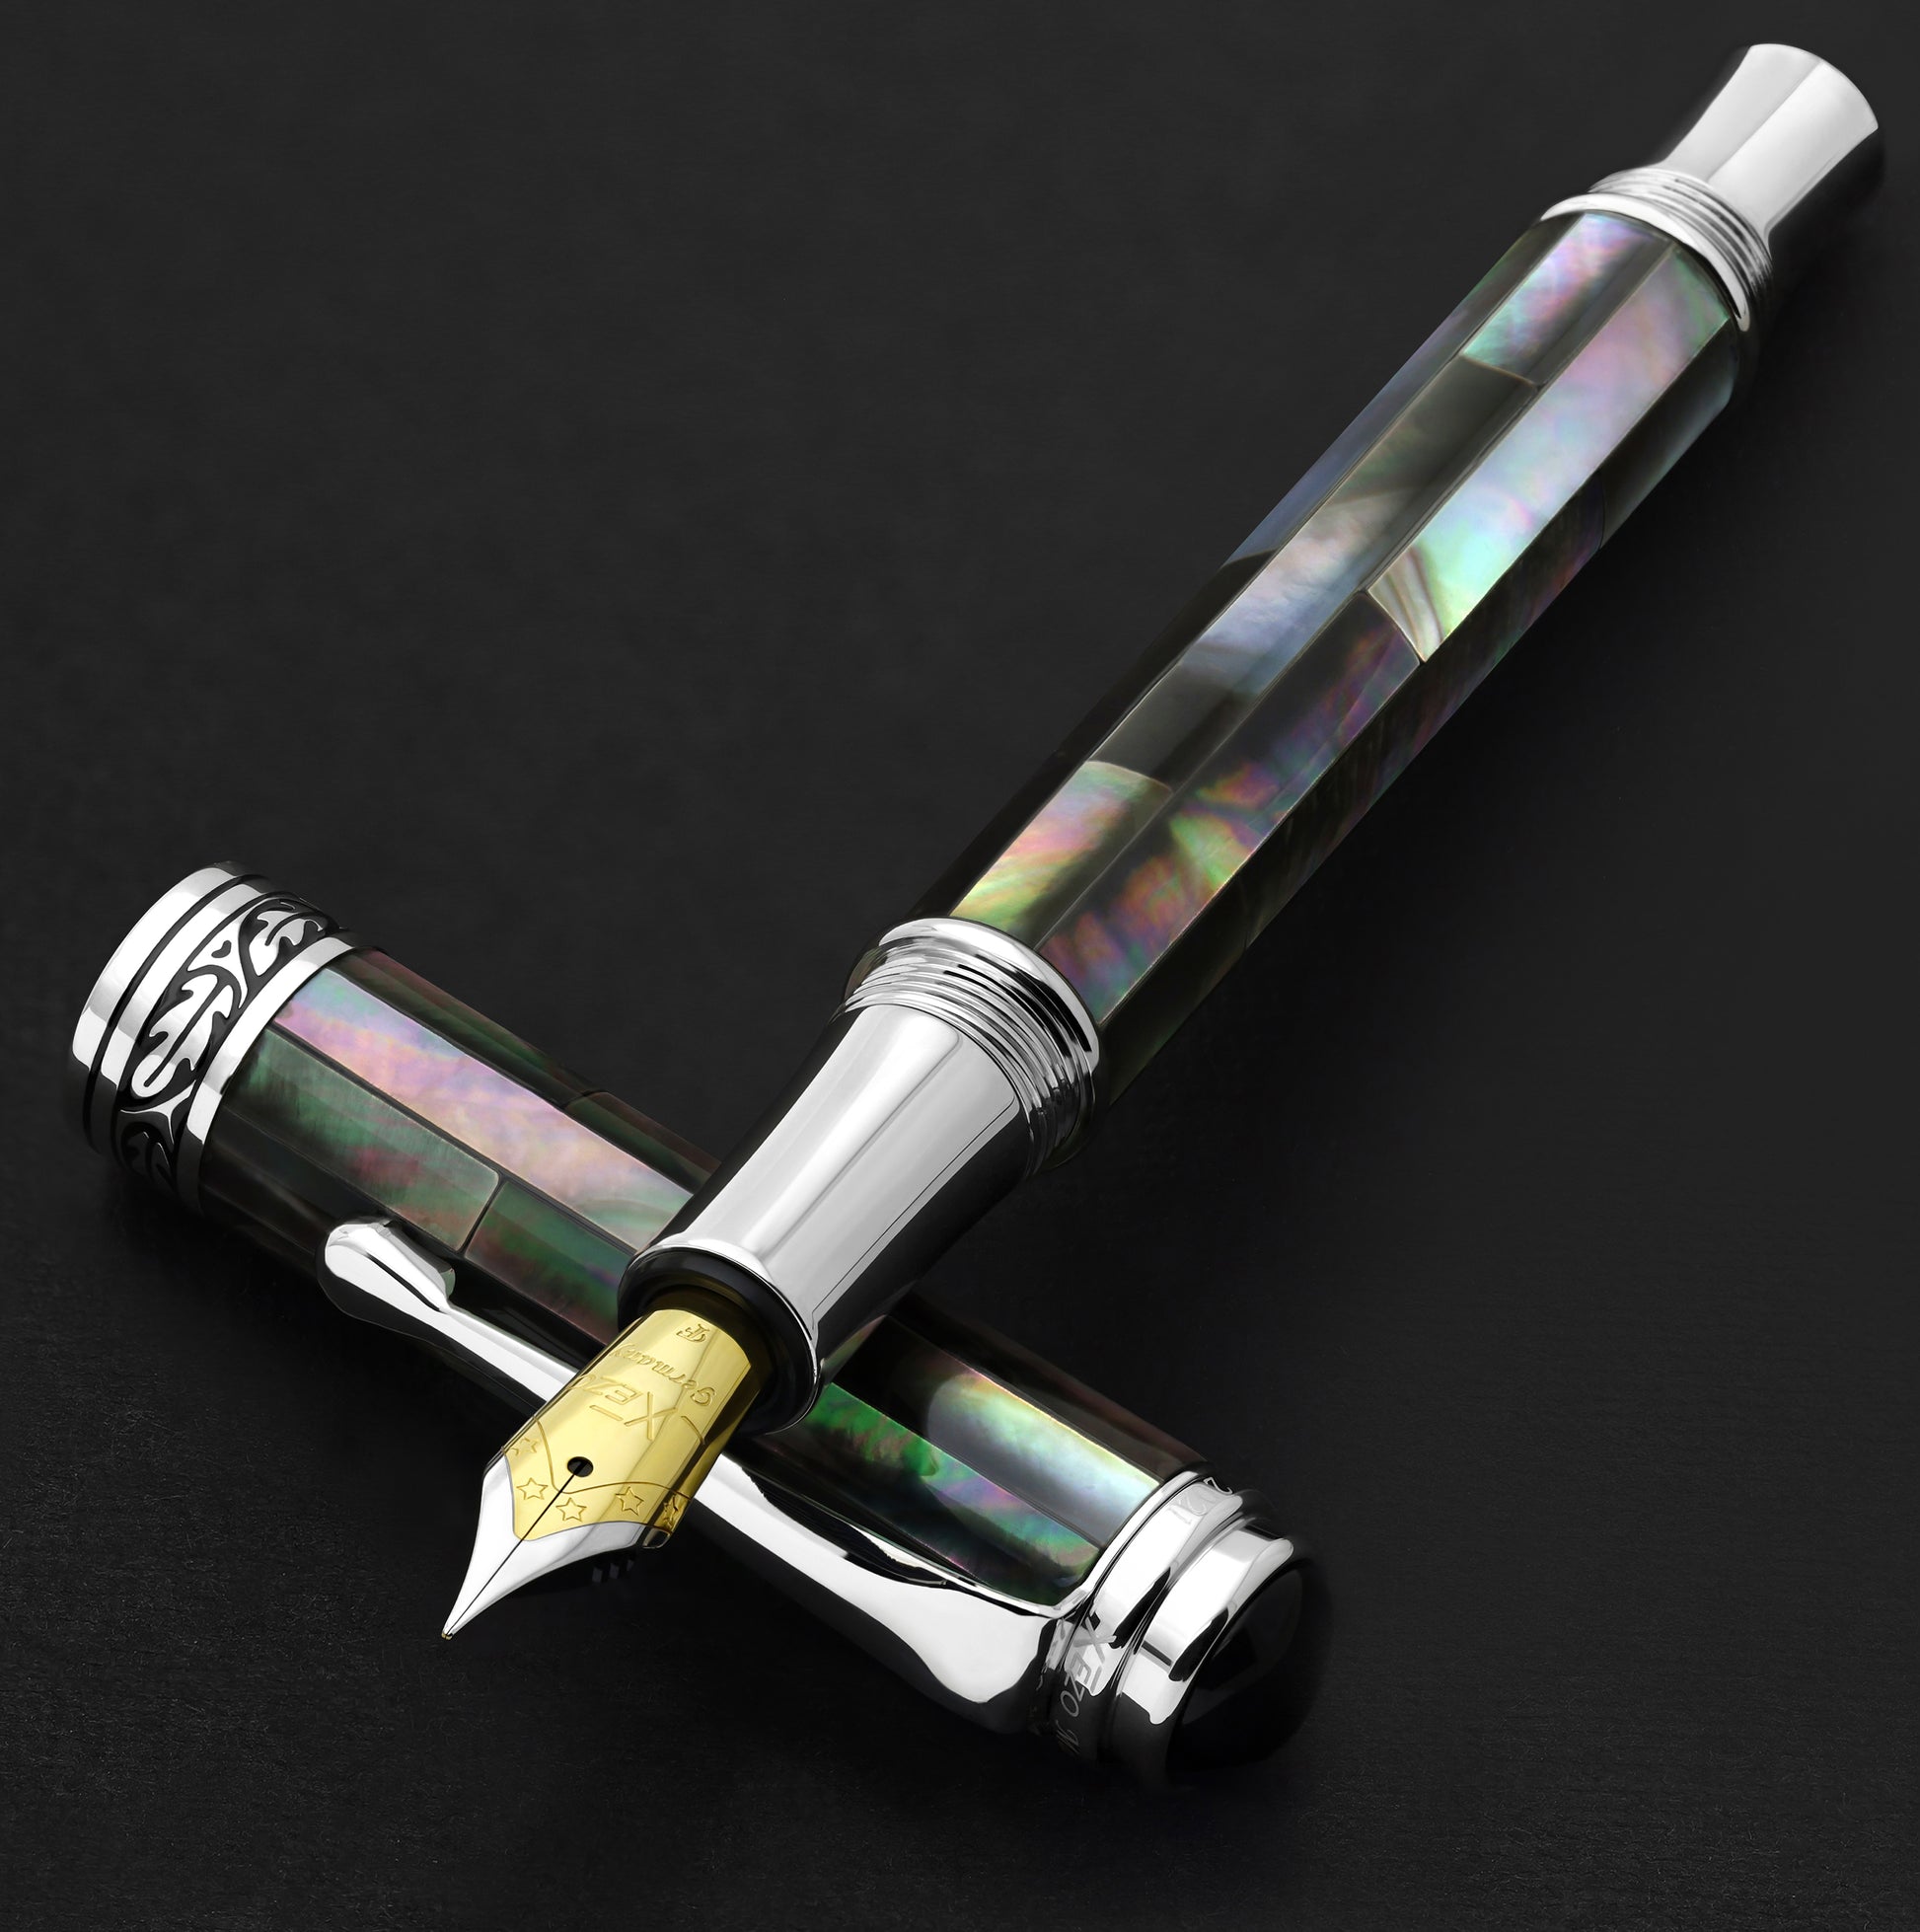 Xezo - Maestro Black Mother of Pearl FBP-2 Fountain pen resting on its cap